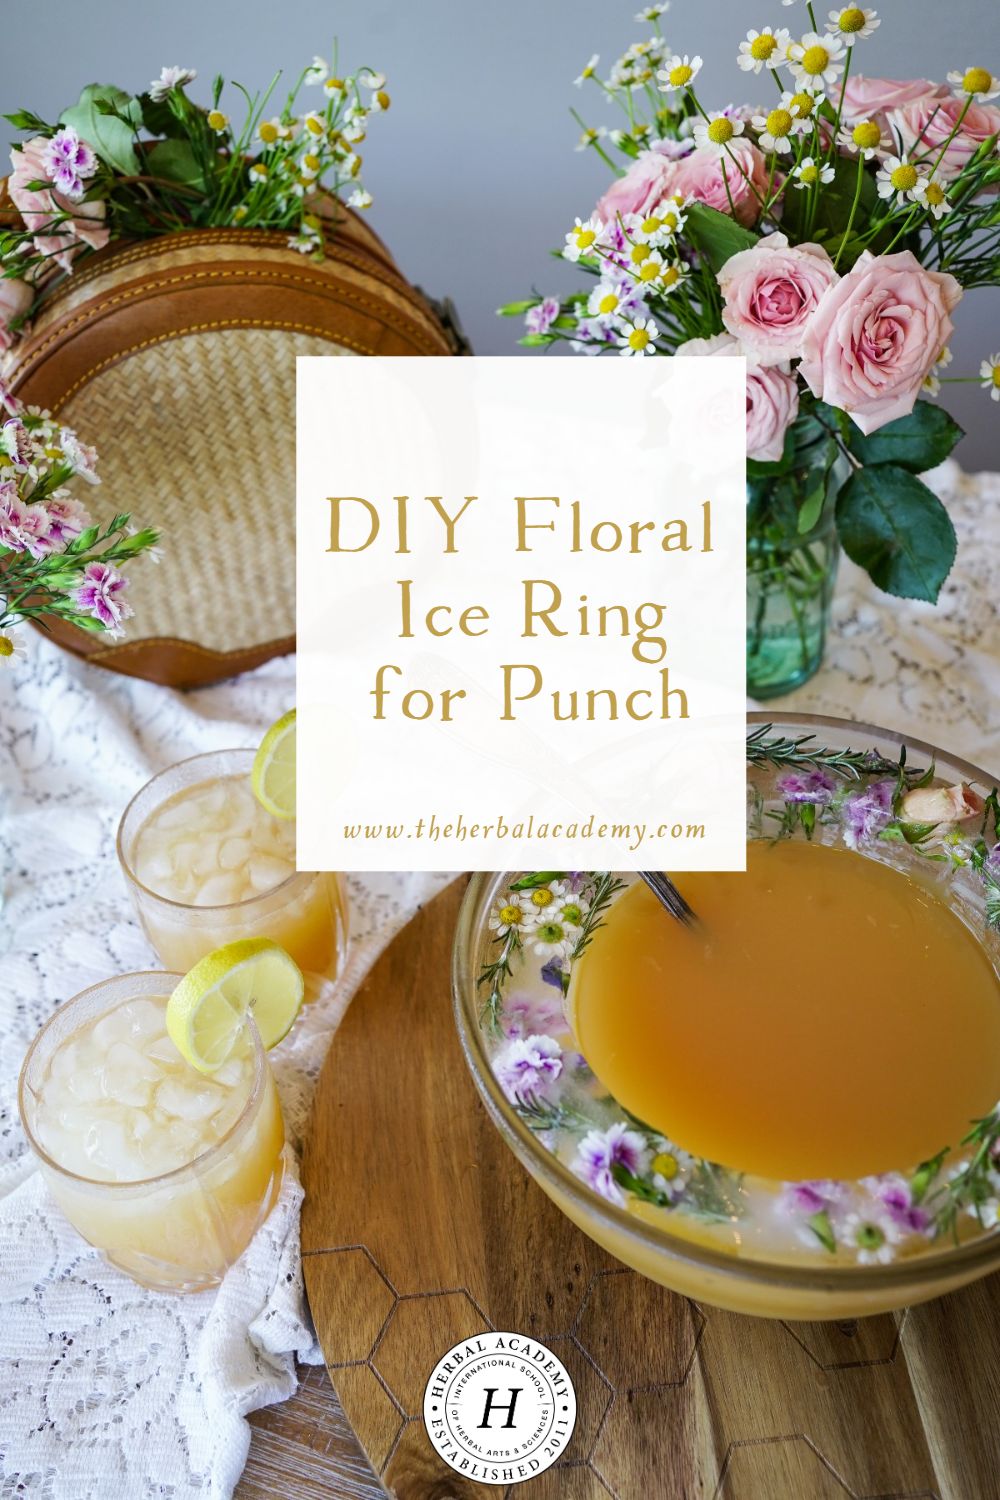 DIY Floral Ice Ring for Punch | Herbal Academy | Learn how to make this easy floral ice ring for punch bowls - the perfect adornment for summer garden parties.